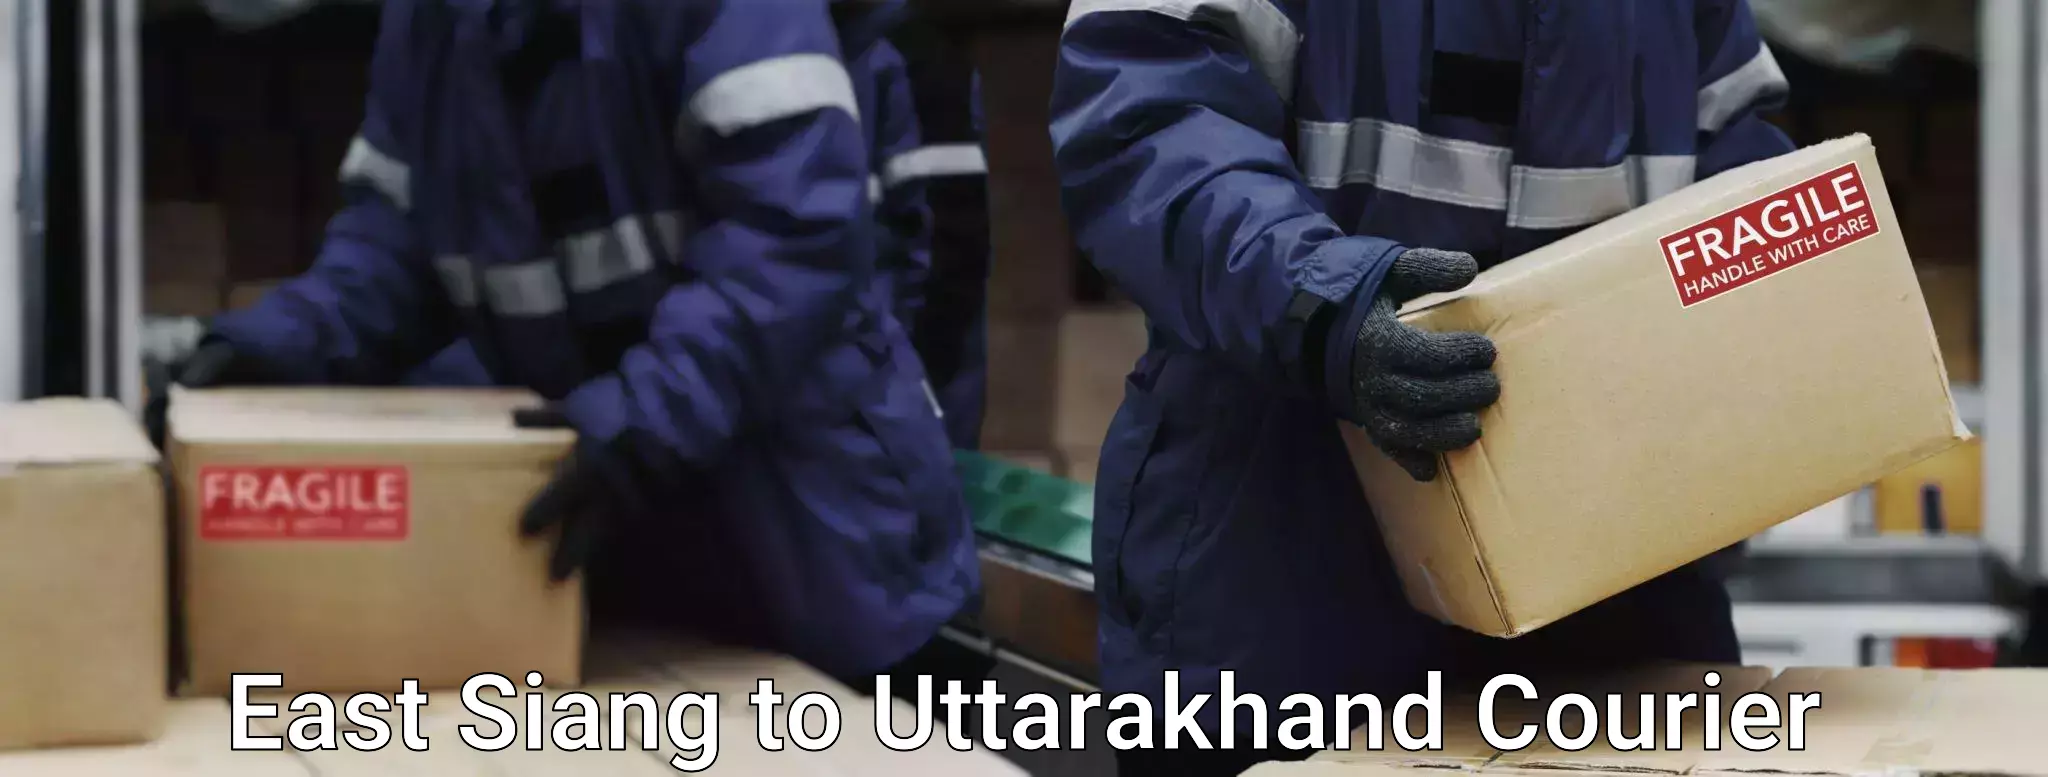 Baggage shipping advice East Siang to Uttarakhand